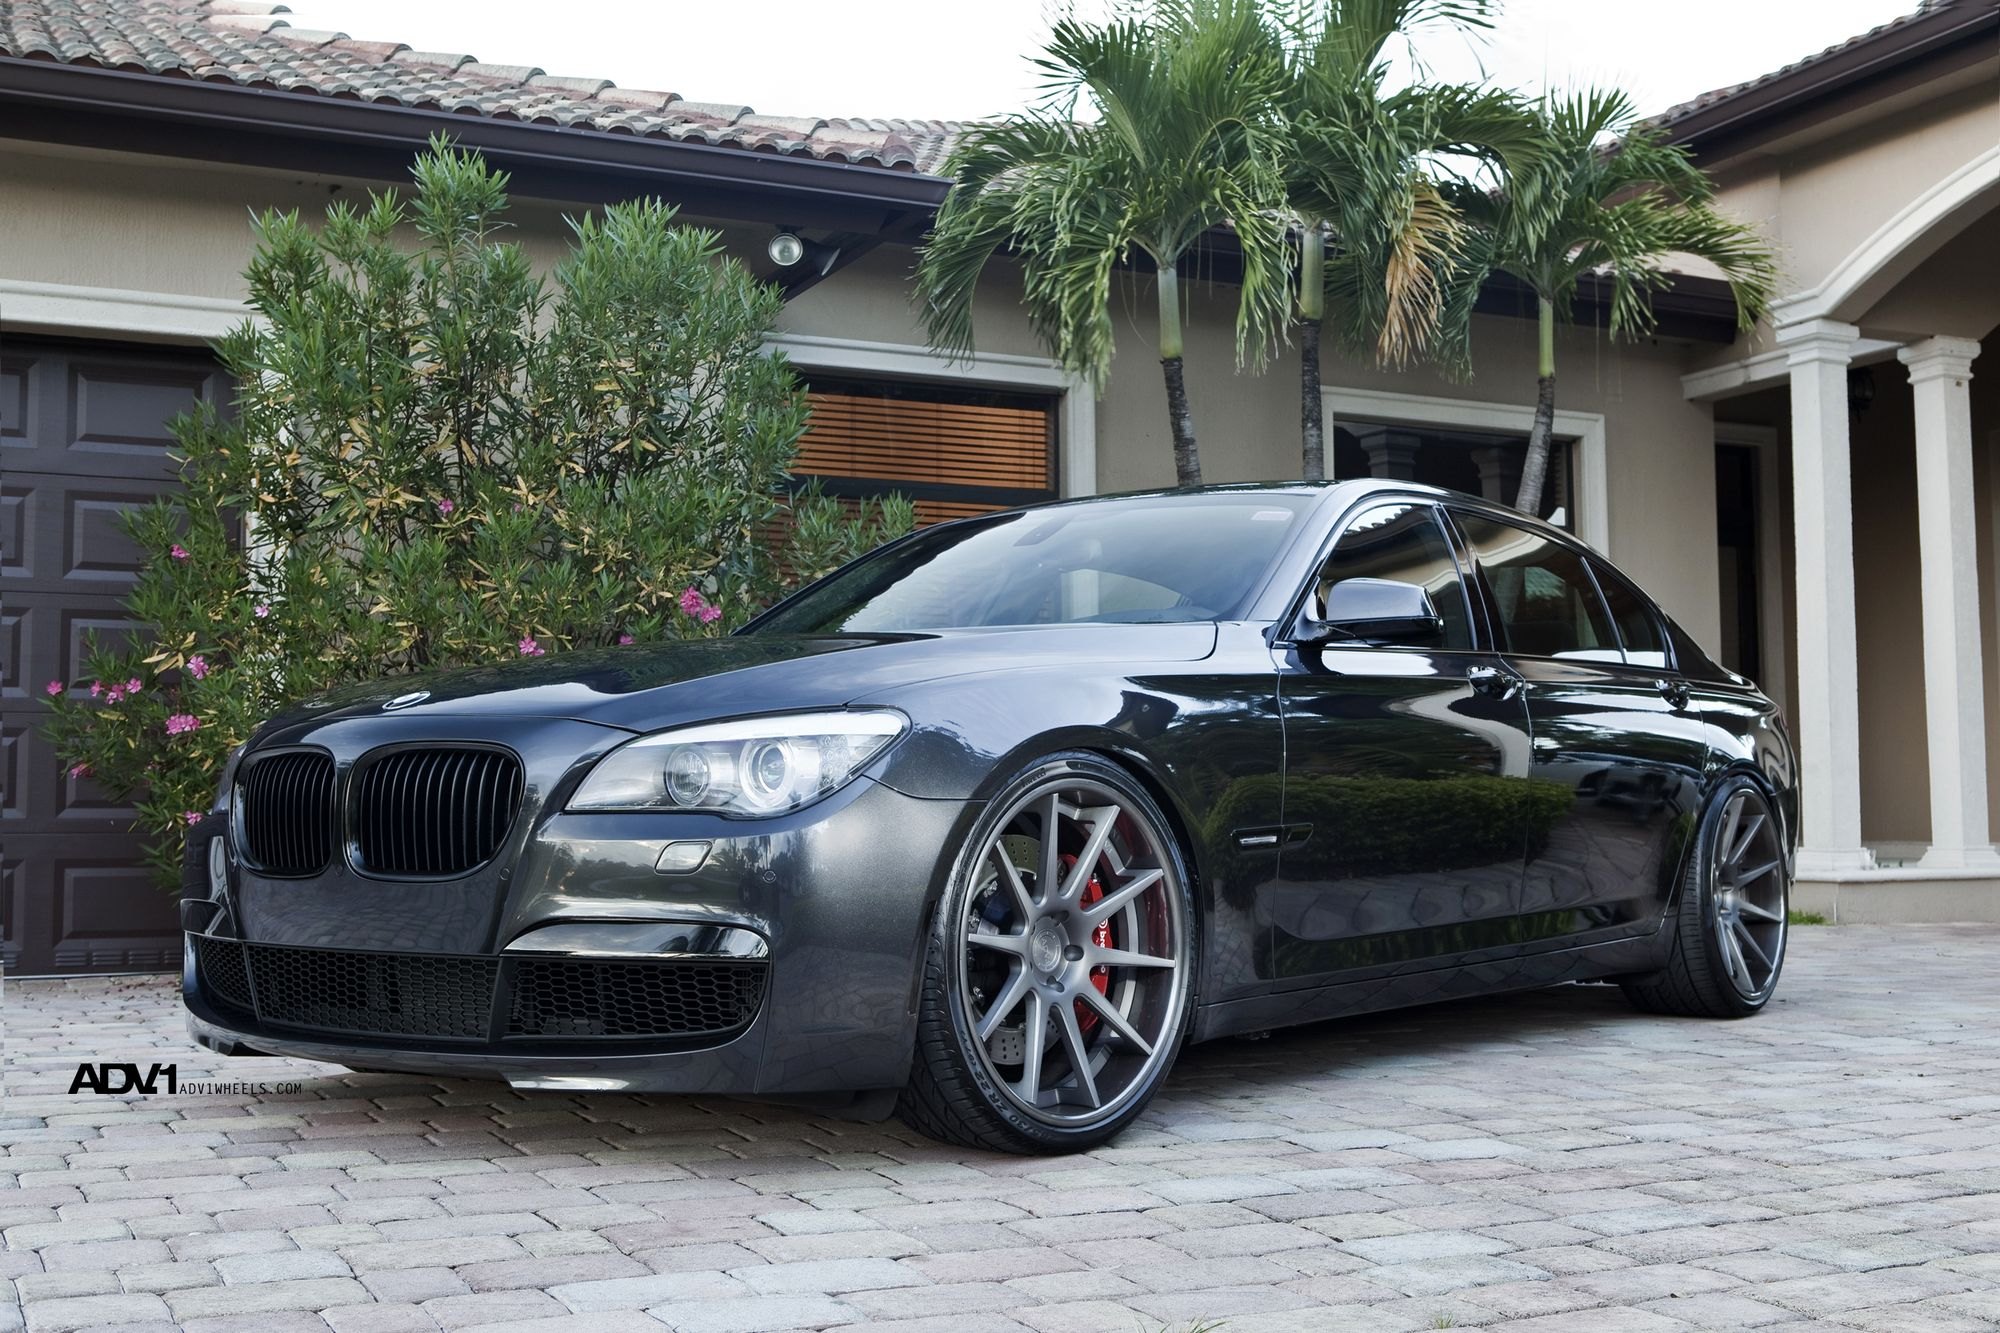 Aftermarket Front Bumper on Black BMW 7-Series - Photo by ADV.1